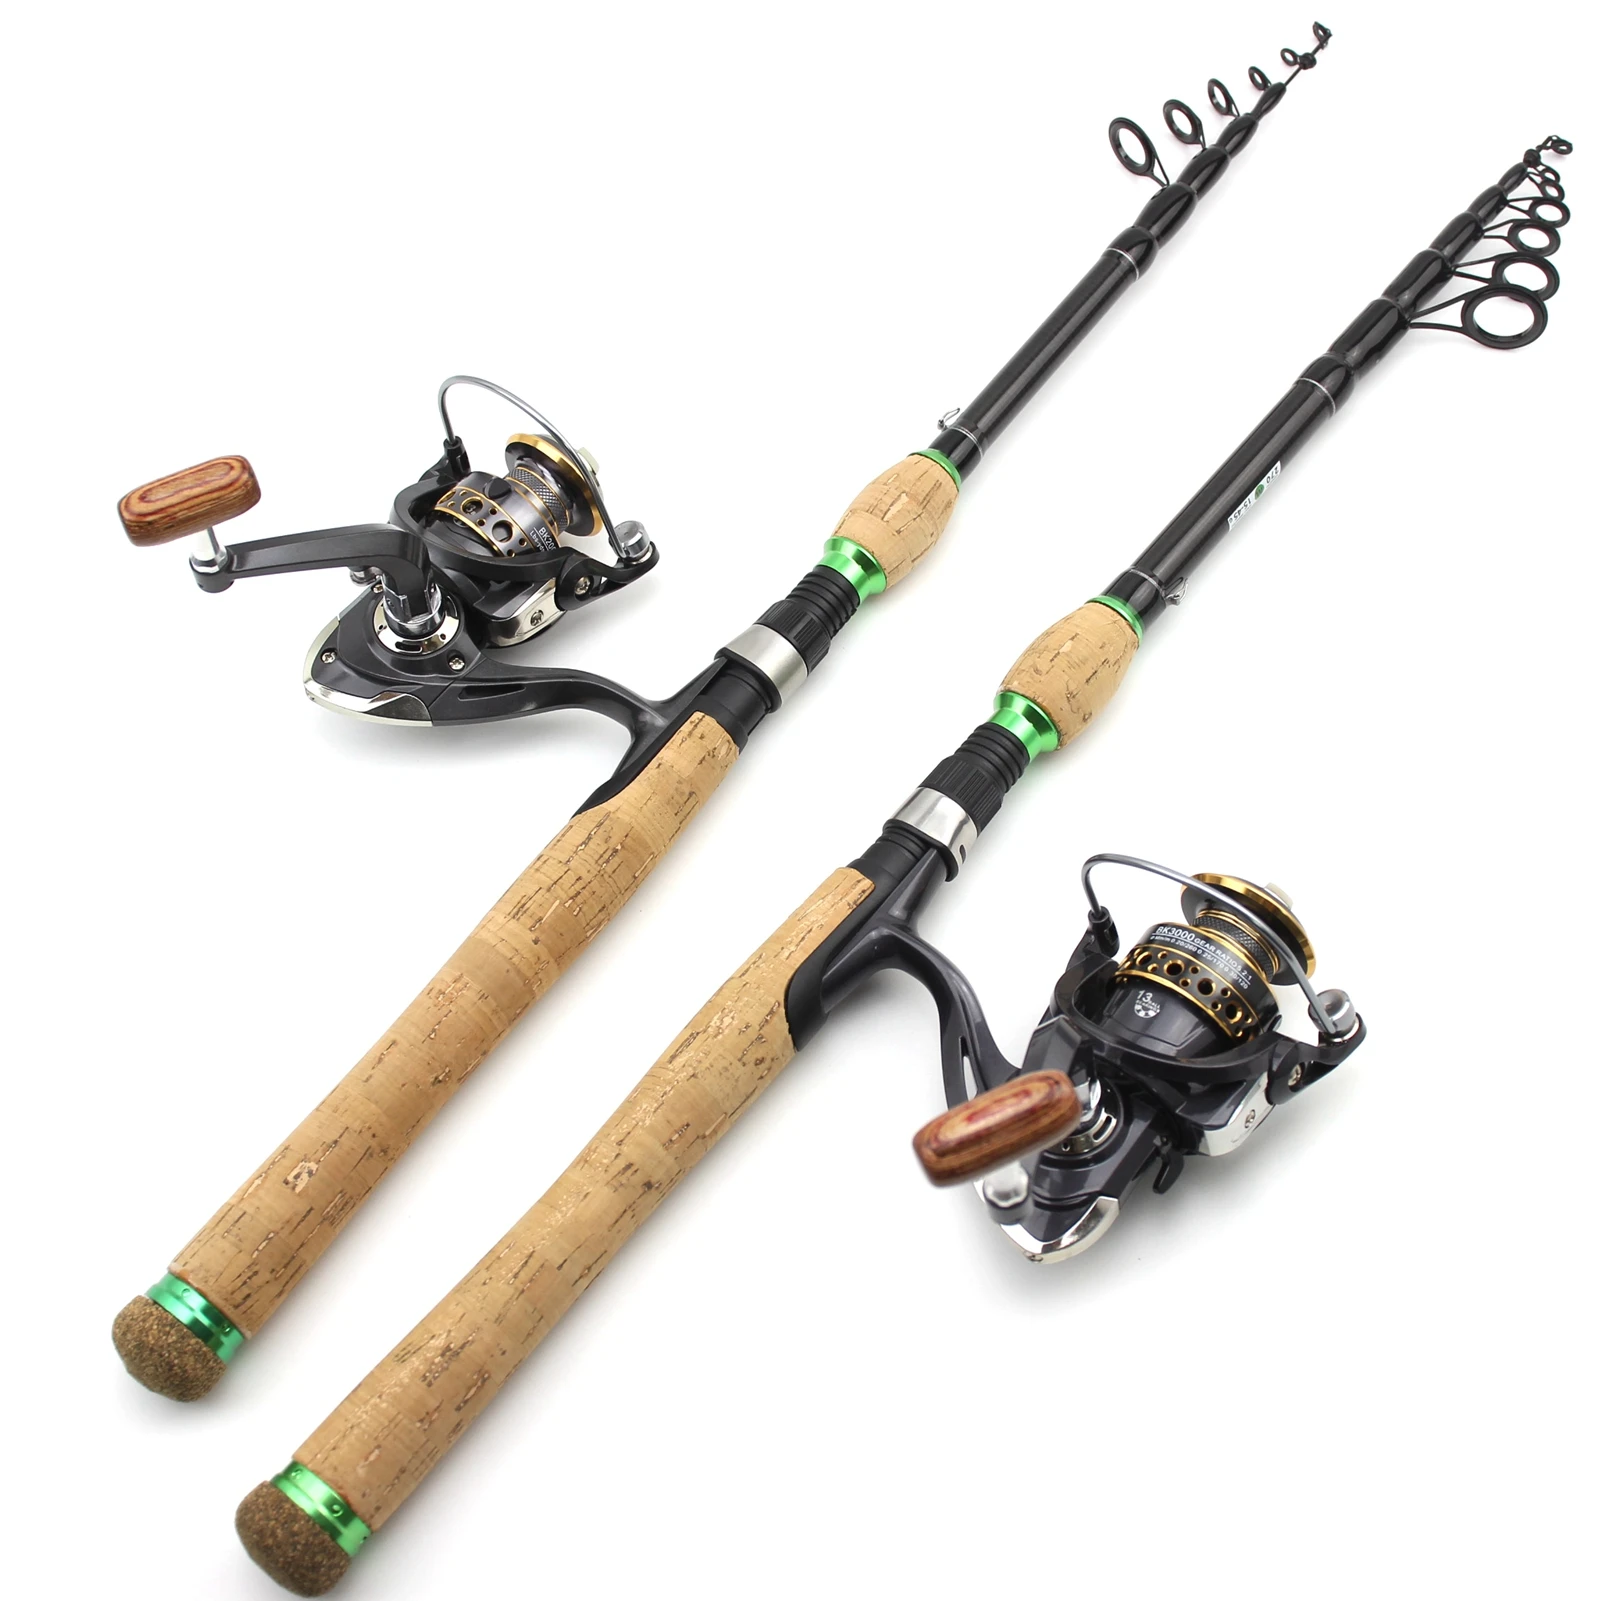 

High Quality Telescopic Fishing Rod and Reel Combos Carbon 1.8M2.1M2.4M2.7M Cork Handle Trout Carp Spinning Pole Tackle